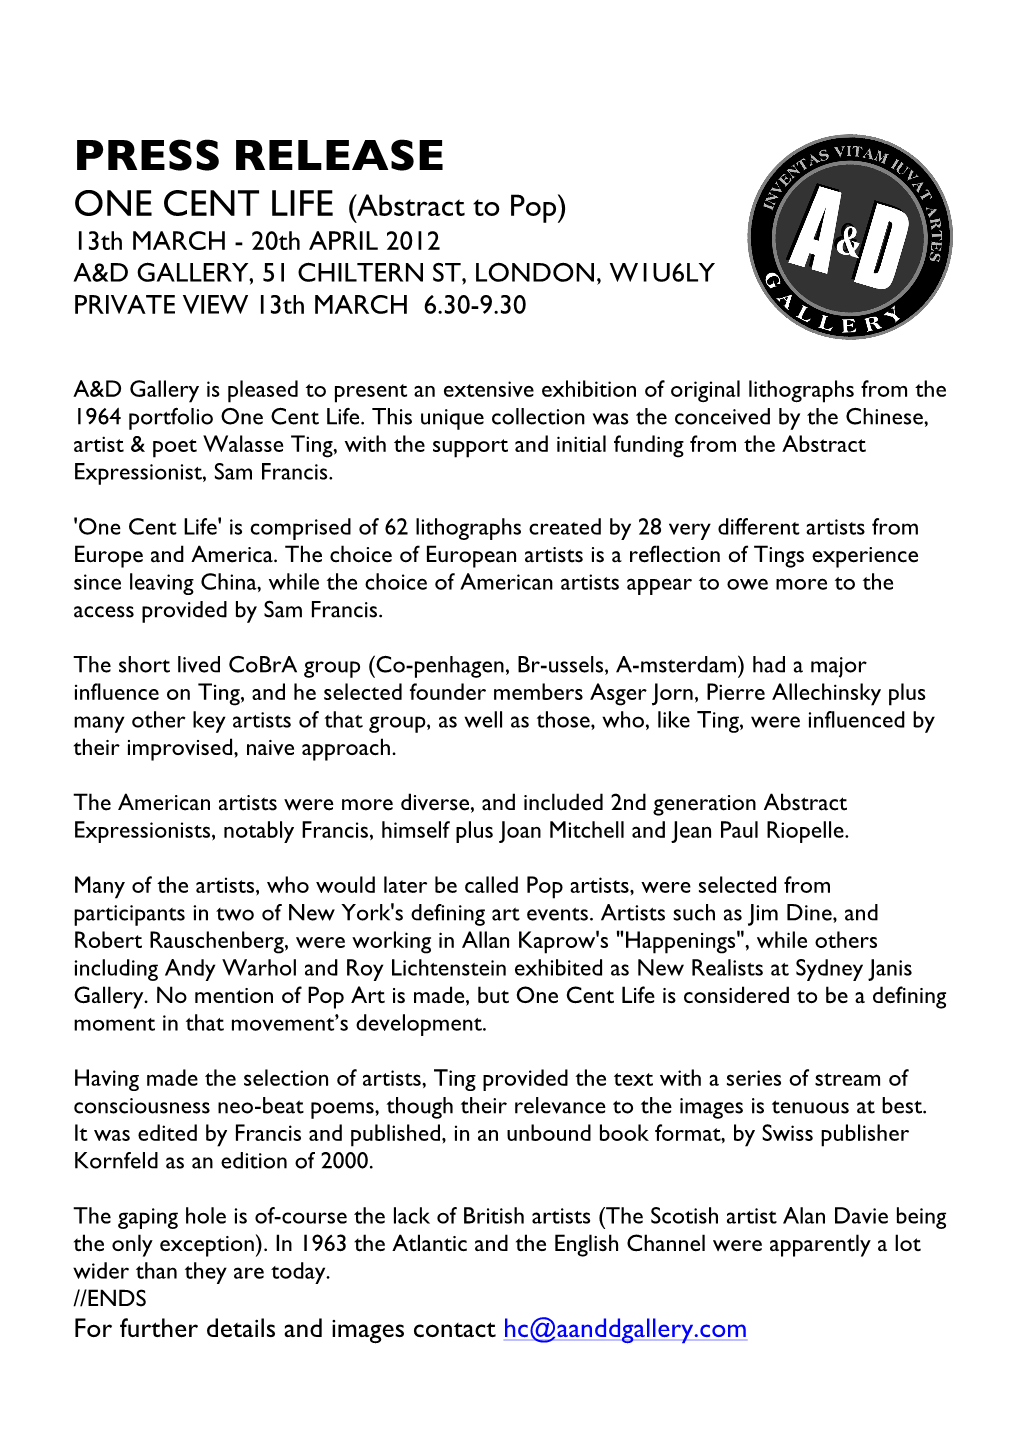 PRESS RELEASE ONE CENT LIFE (Abstract to Pop) 13Th MARCH - 20Th APRIL 2012 A&D GALLERY, 51 CHILTERN ST, LONDON, W1U6LY PRIVATE VIEW 13Th MARCH 6.30-9.30